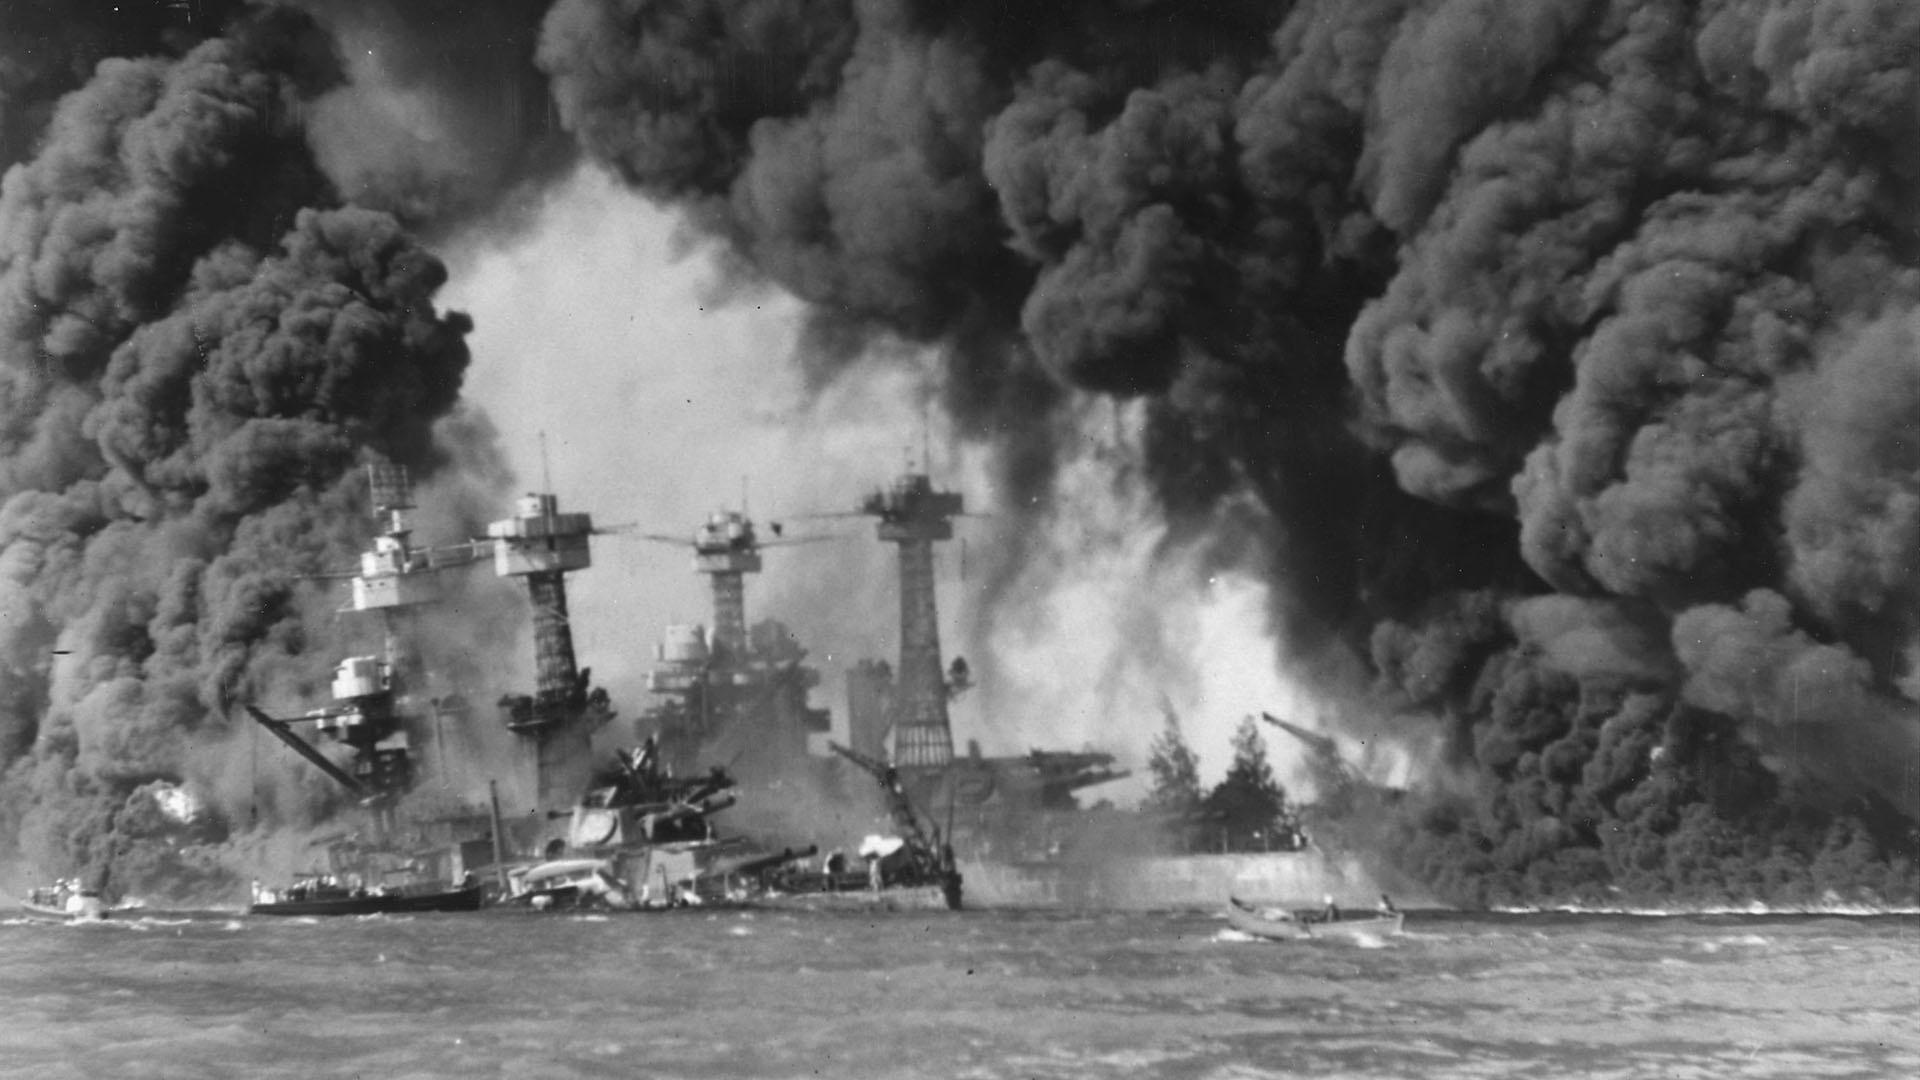 Battleships USS West Virginia and USS Tennessee after the Japanese attack on Pearl Harbor.